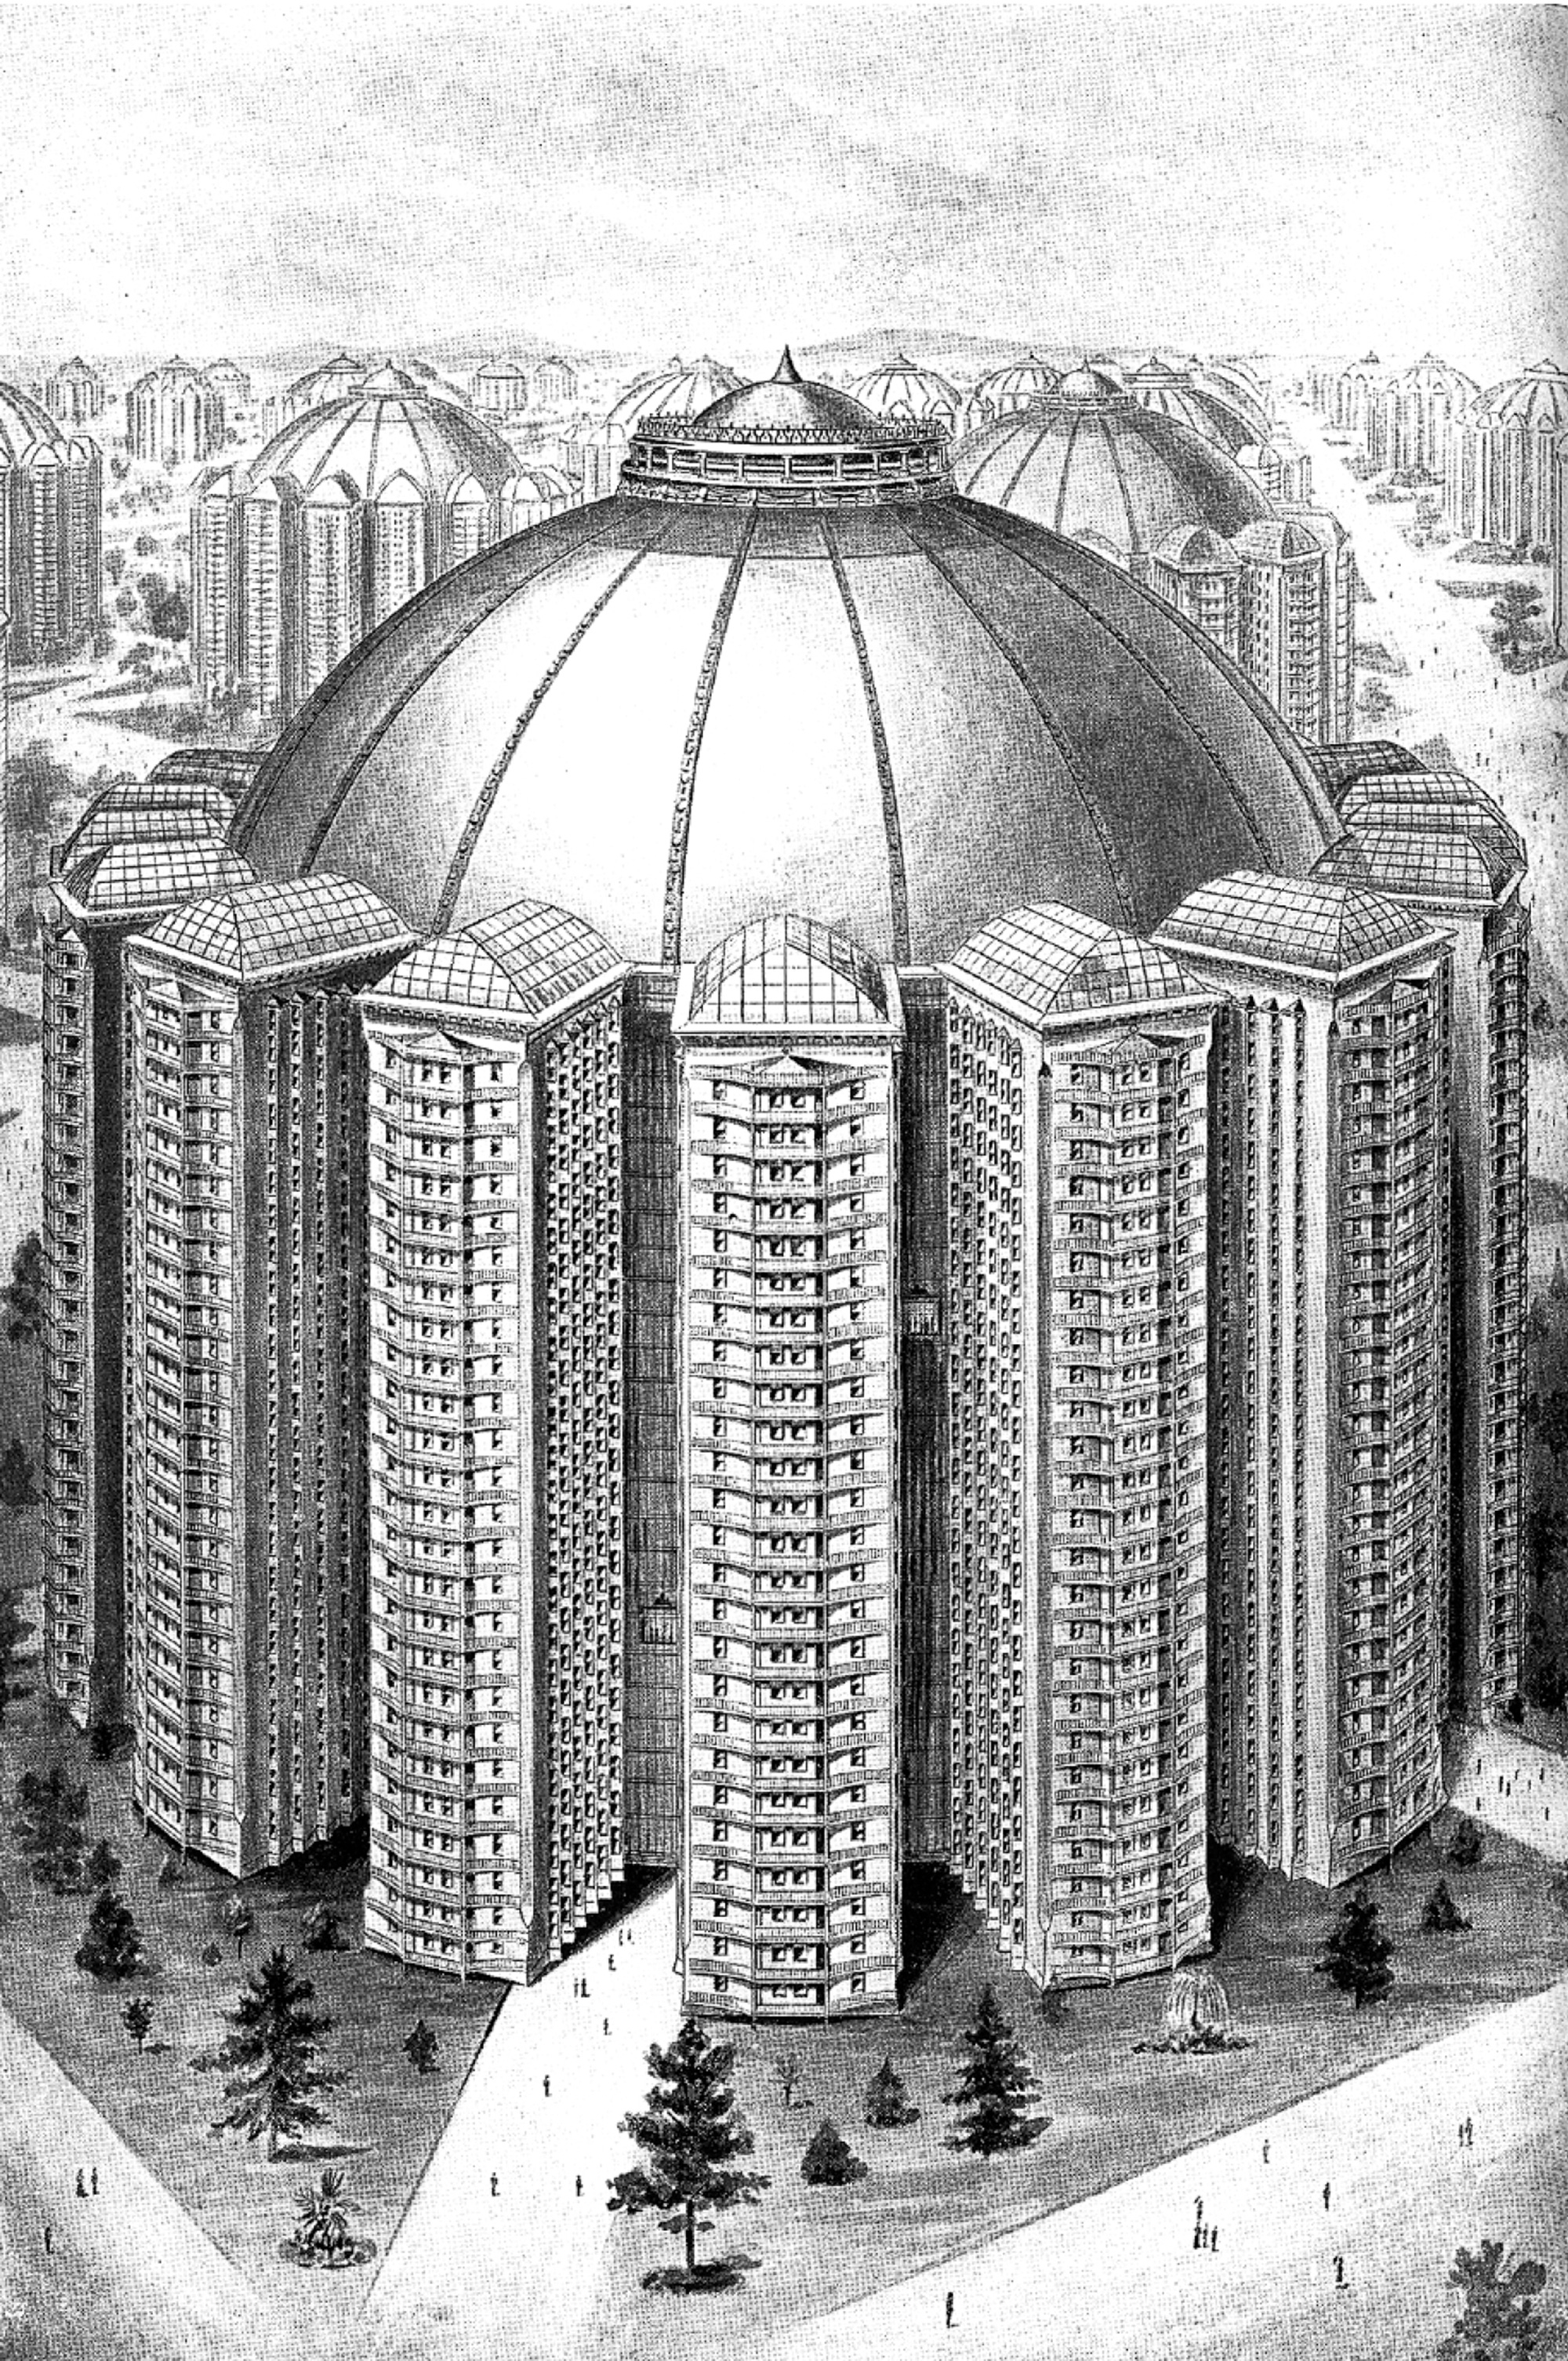 An illustration from King Camp Gillette’s 1894 utopian work, titled “The Human Drift.” It depicts a futuristic building alongside a caption that reads: “A perspective view of a complete building and its imaginary surroundings. Here we see the tiers of apartments arranged in a circle and joined at the back, and the interior court thus formed is surmounted by a dome of metal and glass.”